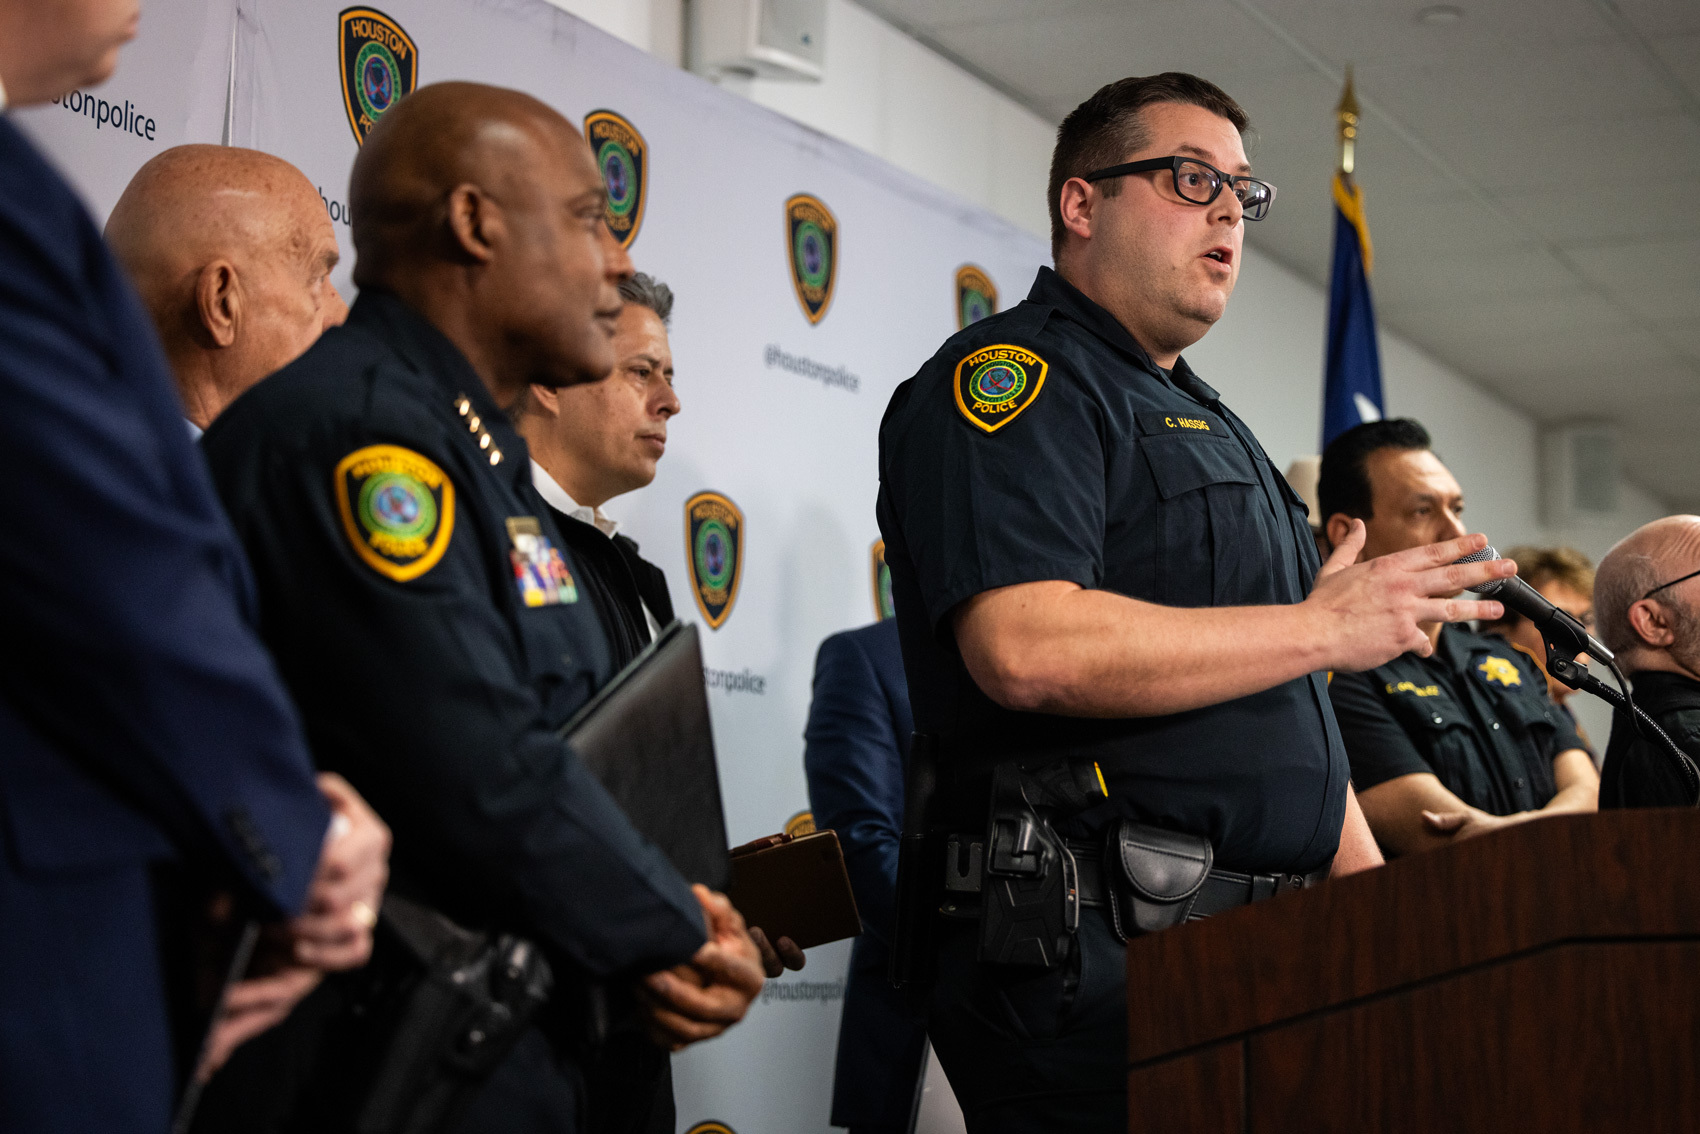 Christopher Hassig, commander of the Houston Police Department's Homicide Division, identified the shooter at Lakewood Church as Genesse Moreno, 36. Police found antisemitic messages written by Moreno, he said.